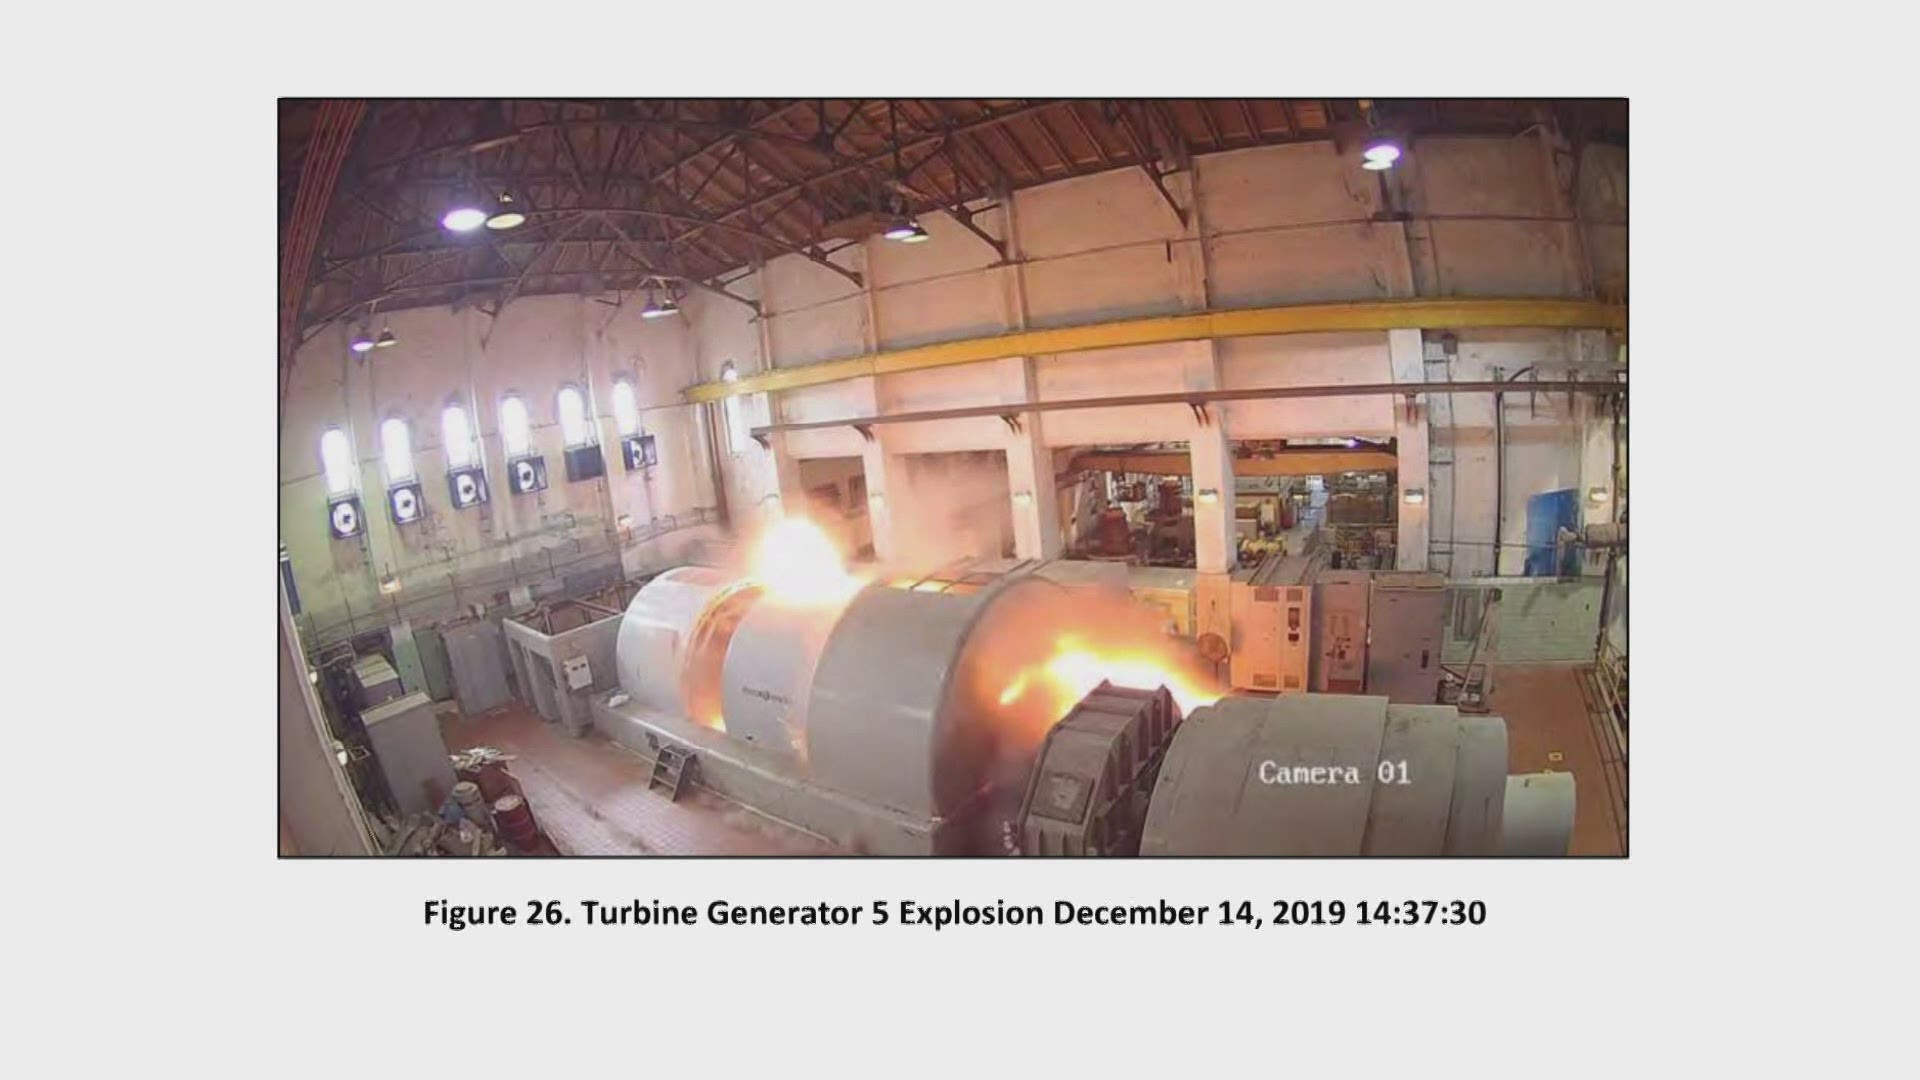 Despite a report from the S&WB that said the explosion for Turbine-5 in 2019 was not human error, a new, independent report says it likely was.